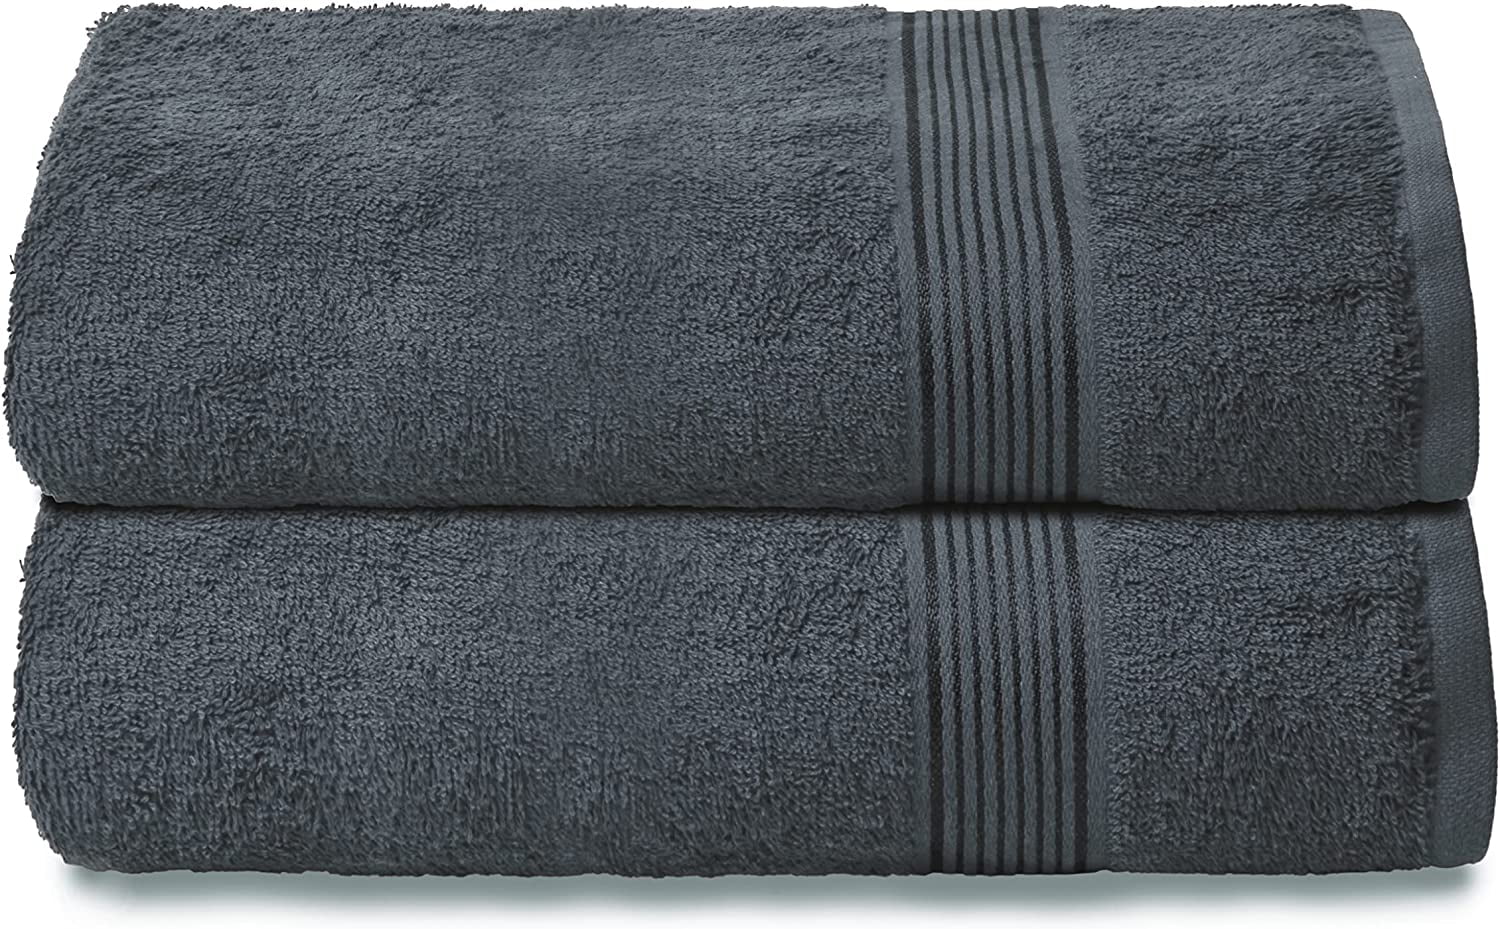 8 Piece Large Grey Family Bath Towel Set-2 Oversized Bath Towel Sheets,2  Hand Towels,4 Washcloths-600GSM Soft Highly Absorbent Quick Dry Beach Chair